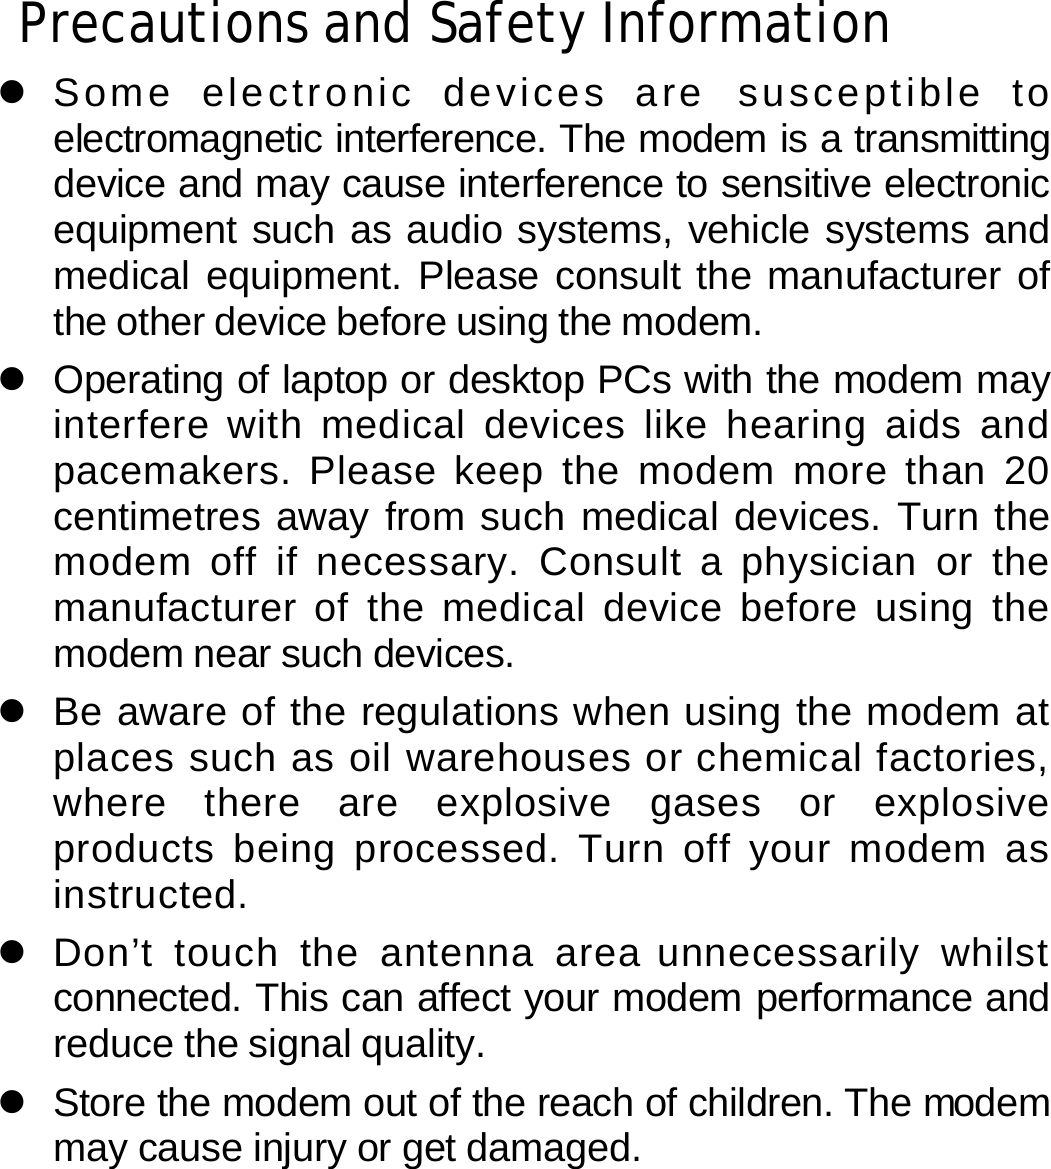 Precautions and Safety Information z Some electronic devices are susceptible to electromagnetic interference. The modem is a transmitting device and may cause interference to sensitive electronic equipment such as audio systems, vehicle systems and medical equipment. Please consult the manufacturer of the other device before using the modem. z  Operating of laptop or desktop PCs with the modem may interfere with medical devices like hearing aids and pacemakers. Please keep the modem more than 20 centimetres away from such medical devices. Turn the modem off if necessary. Consult a physician or the manufacturer of the medical device before using the modem near such devices. z  Be aware of the regulations when using the modem at places such as oil warehouses or chemical factories, where there are explosive gases or explosive products being processed. Turn off your modem as instructed. z Don’t touch the antenna area unnecessarily whilst connected. This can affect your modem performance and reduce the signal quality. z  Store the modem out of the reach of children. The modem may cause injury or get damaged.   36 